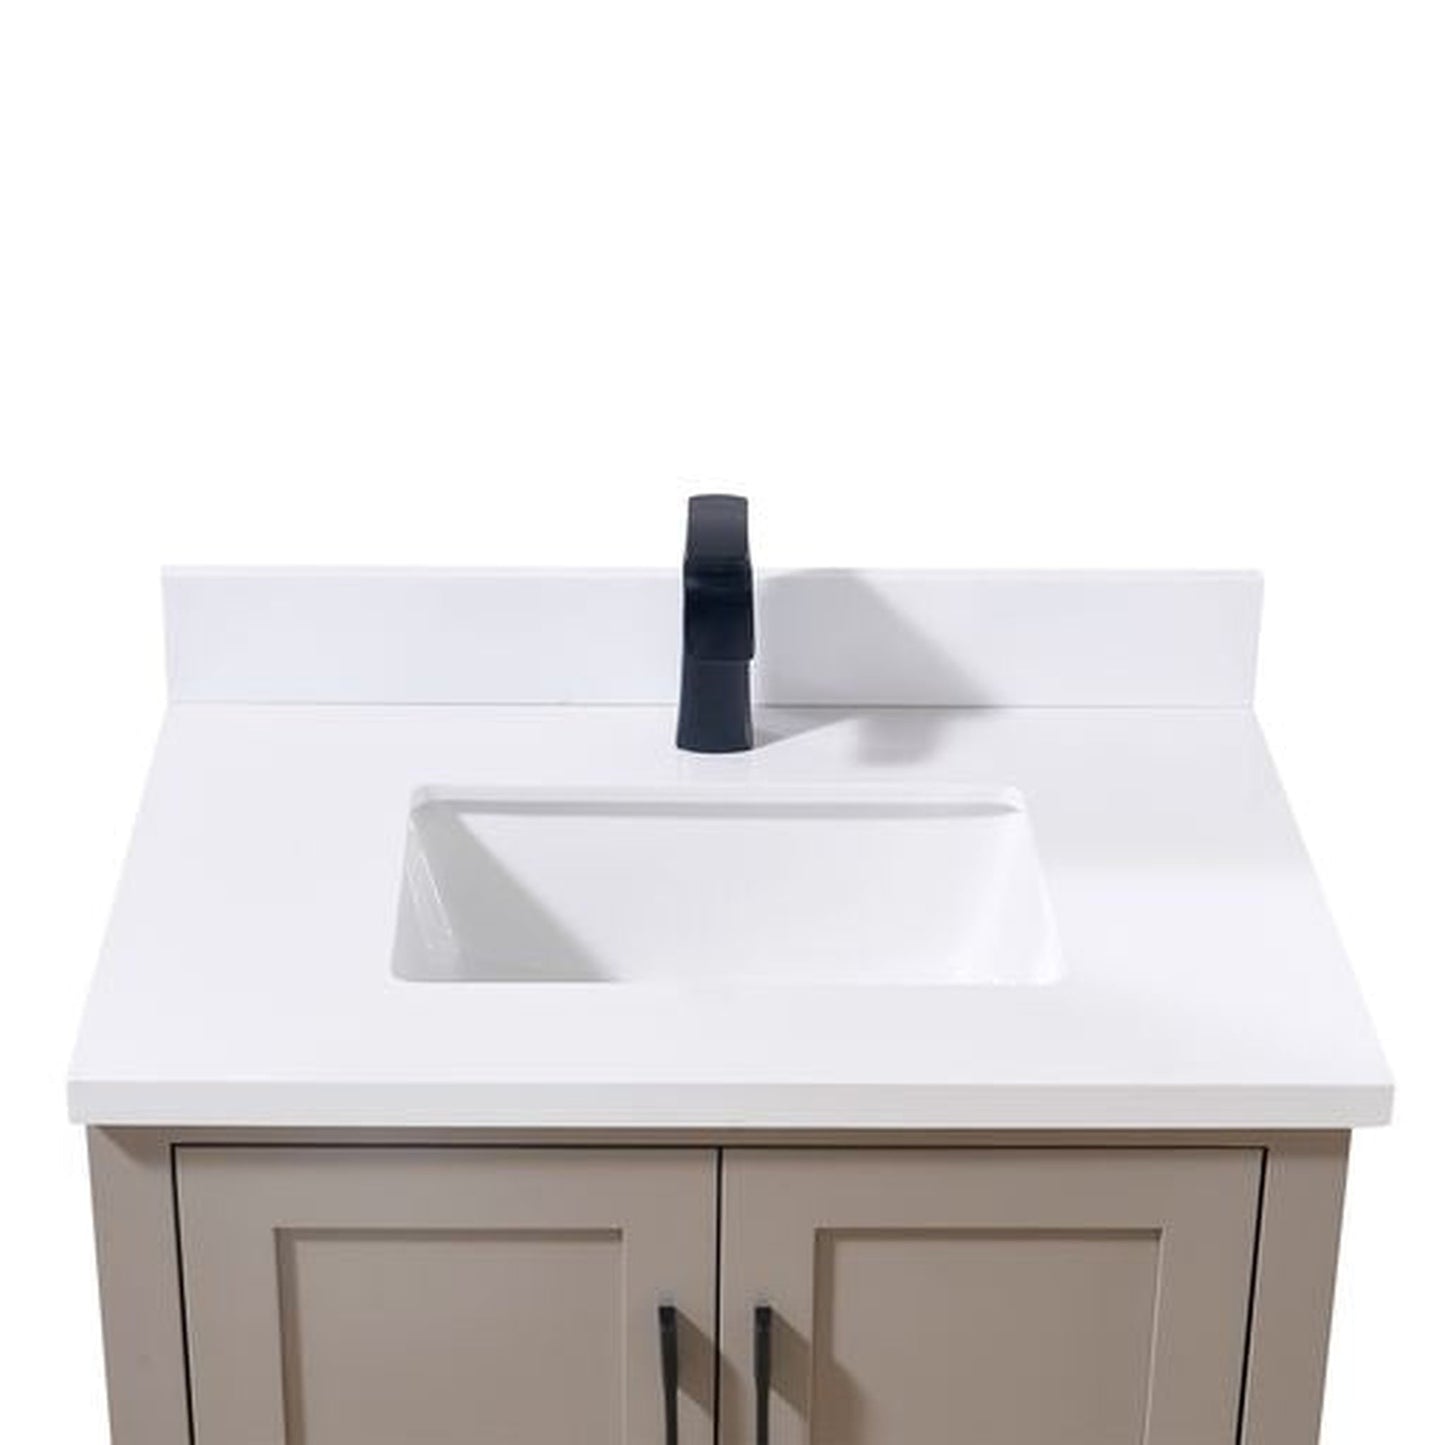 Altair Caorle 31" x 22" Snow White Composite Stone Bathroom Vanity Top With White SInk